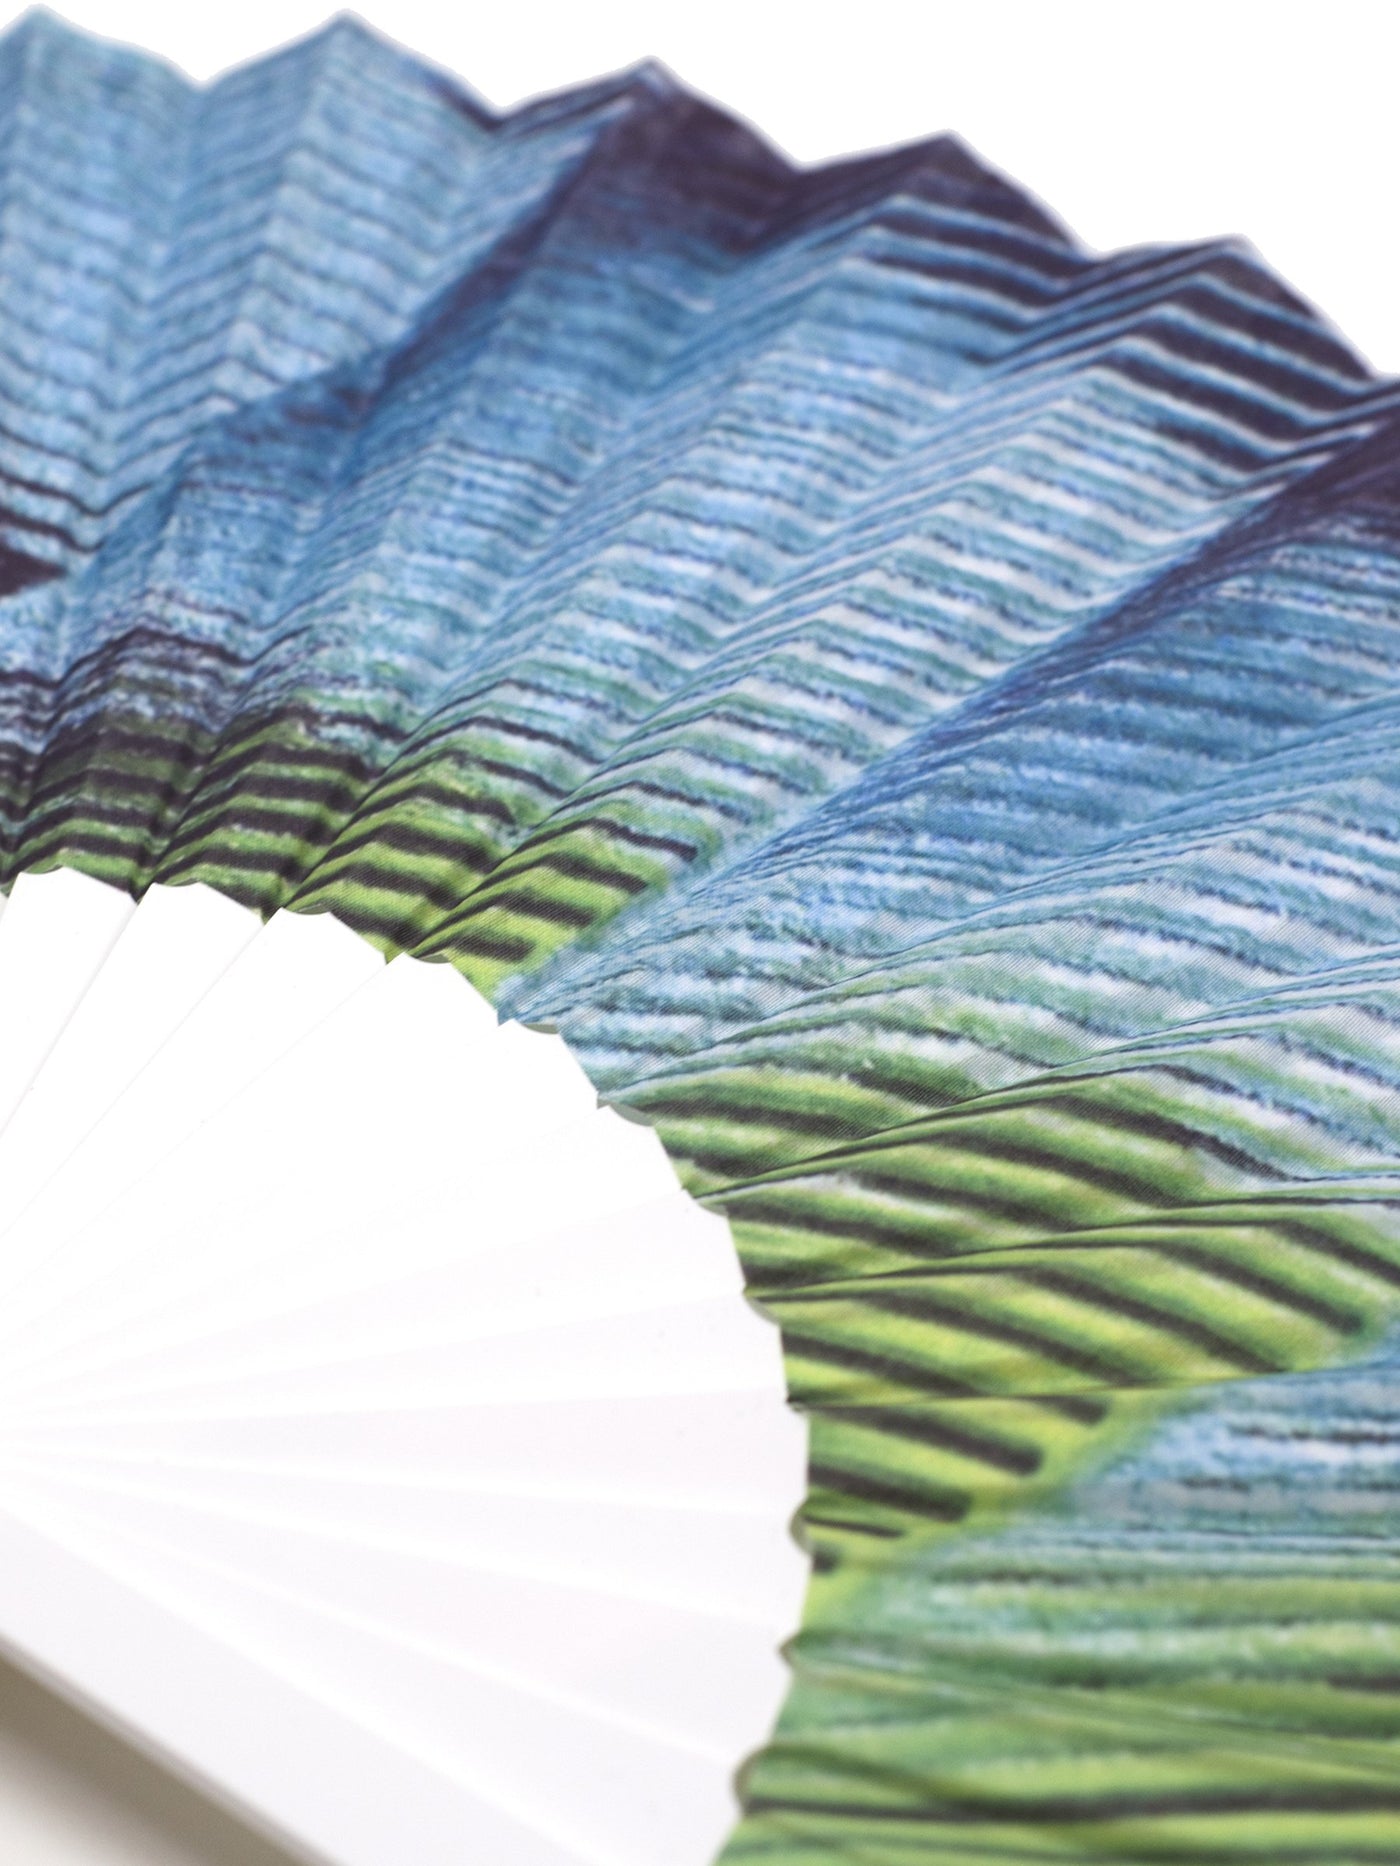 Close Up of Khu Khu MACAW Tropical Bird Wing Print Hand-Fan in blue and green tones. Painted and then printed onto high grade cotton with swiss acrylic bespoke shape white sticks. Blue rivet and white rim. Engraved logo.